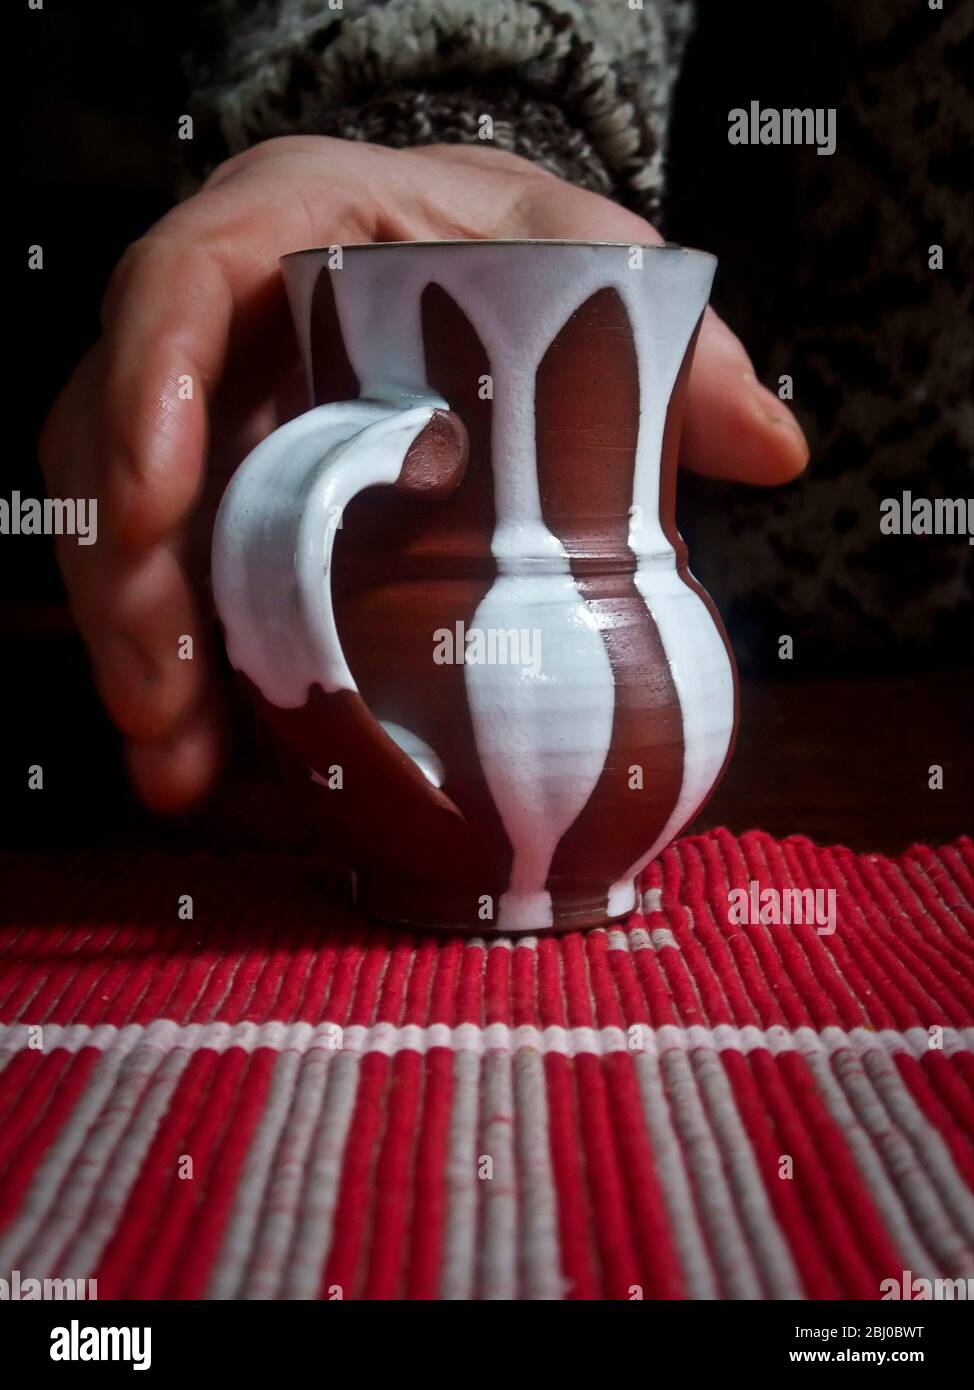 Picking up a cup of coffee or tea in a stripey pottery mug on a striped tablecloth - Stock Photo